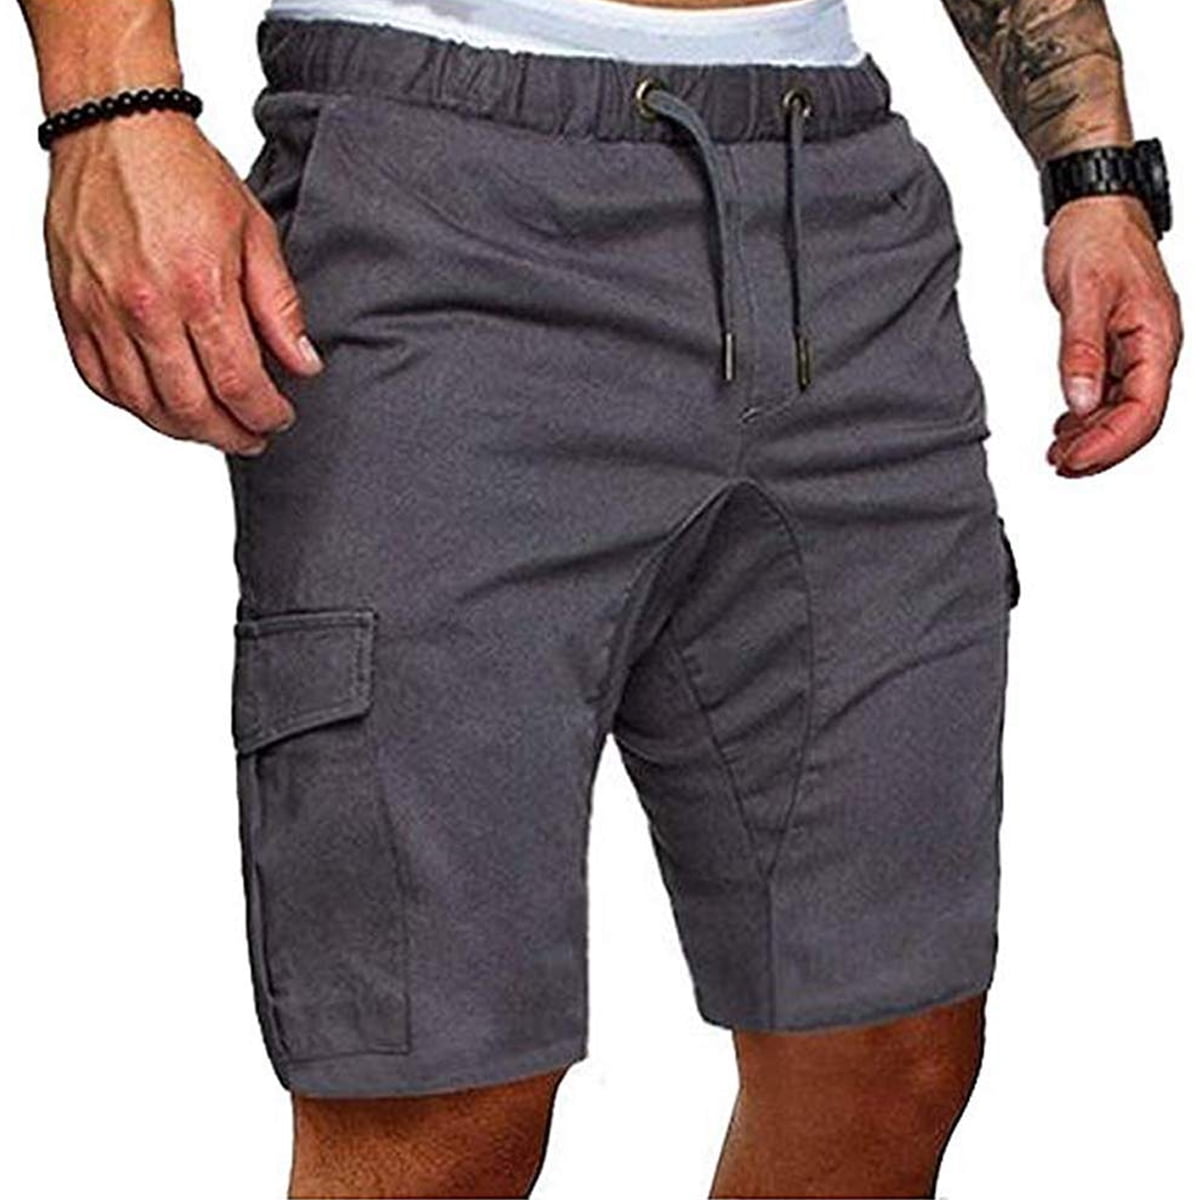 ZAXARRA Mens Cargo Shorts Combat Military Army Casual Summer Hiking ...